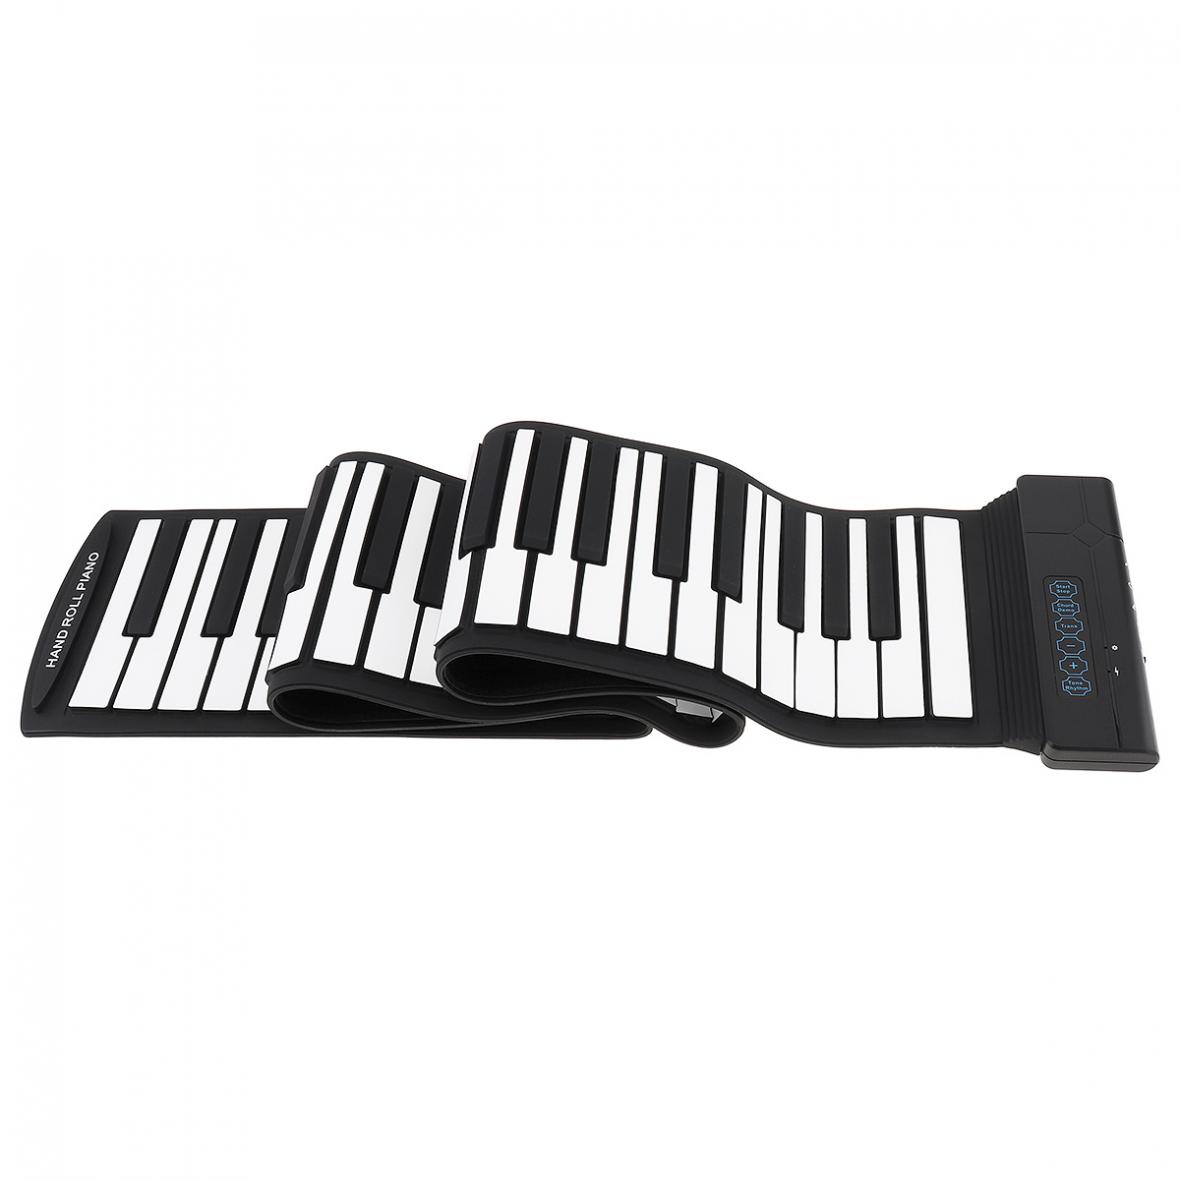 88 Keys USB MIDI Output Roll Up Piano Rechargeable Electronic Portable Silicone Flexible Keyboard Organ with Sustain Pedal